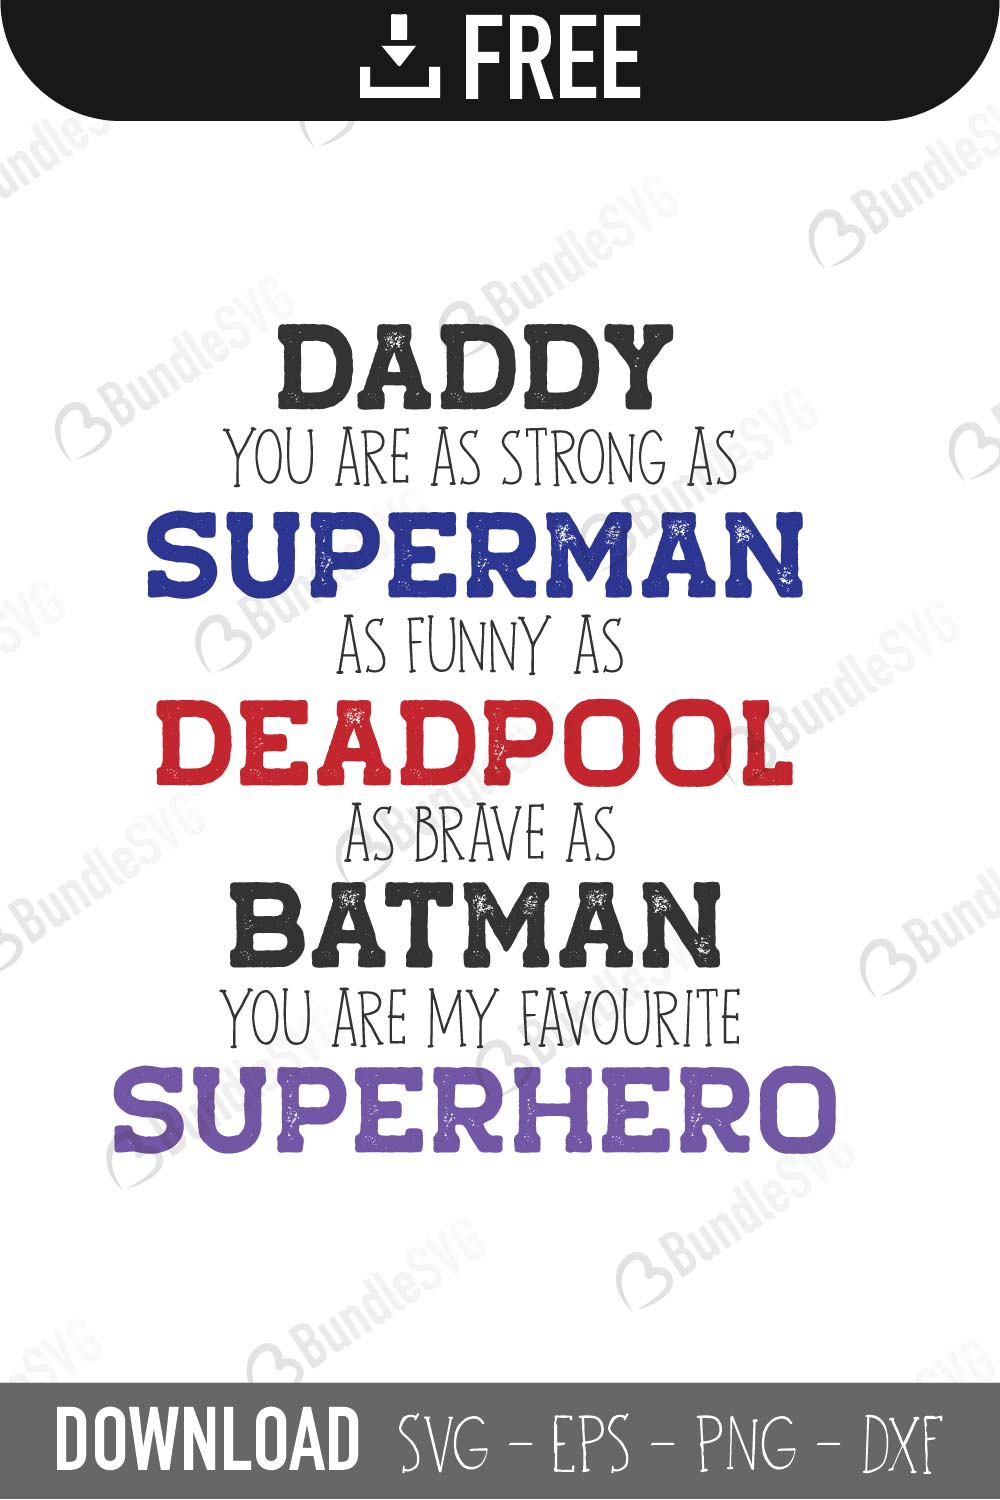 Daddy You Are As Strong As Superman SVG Cut File / Free Download ...